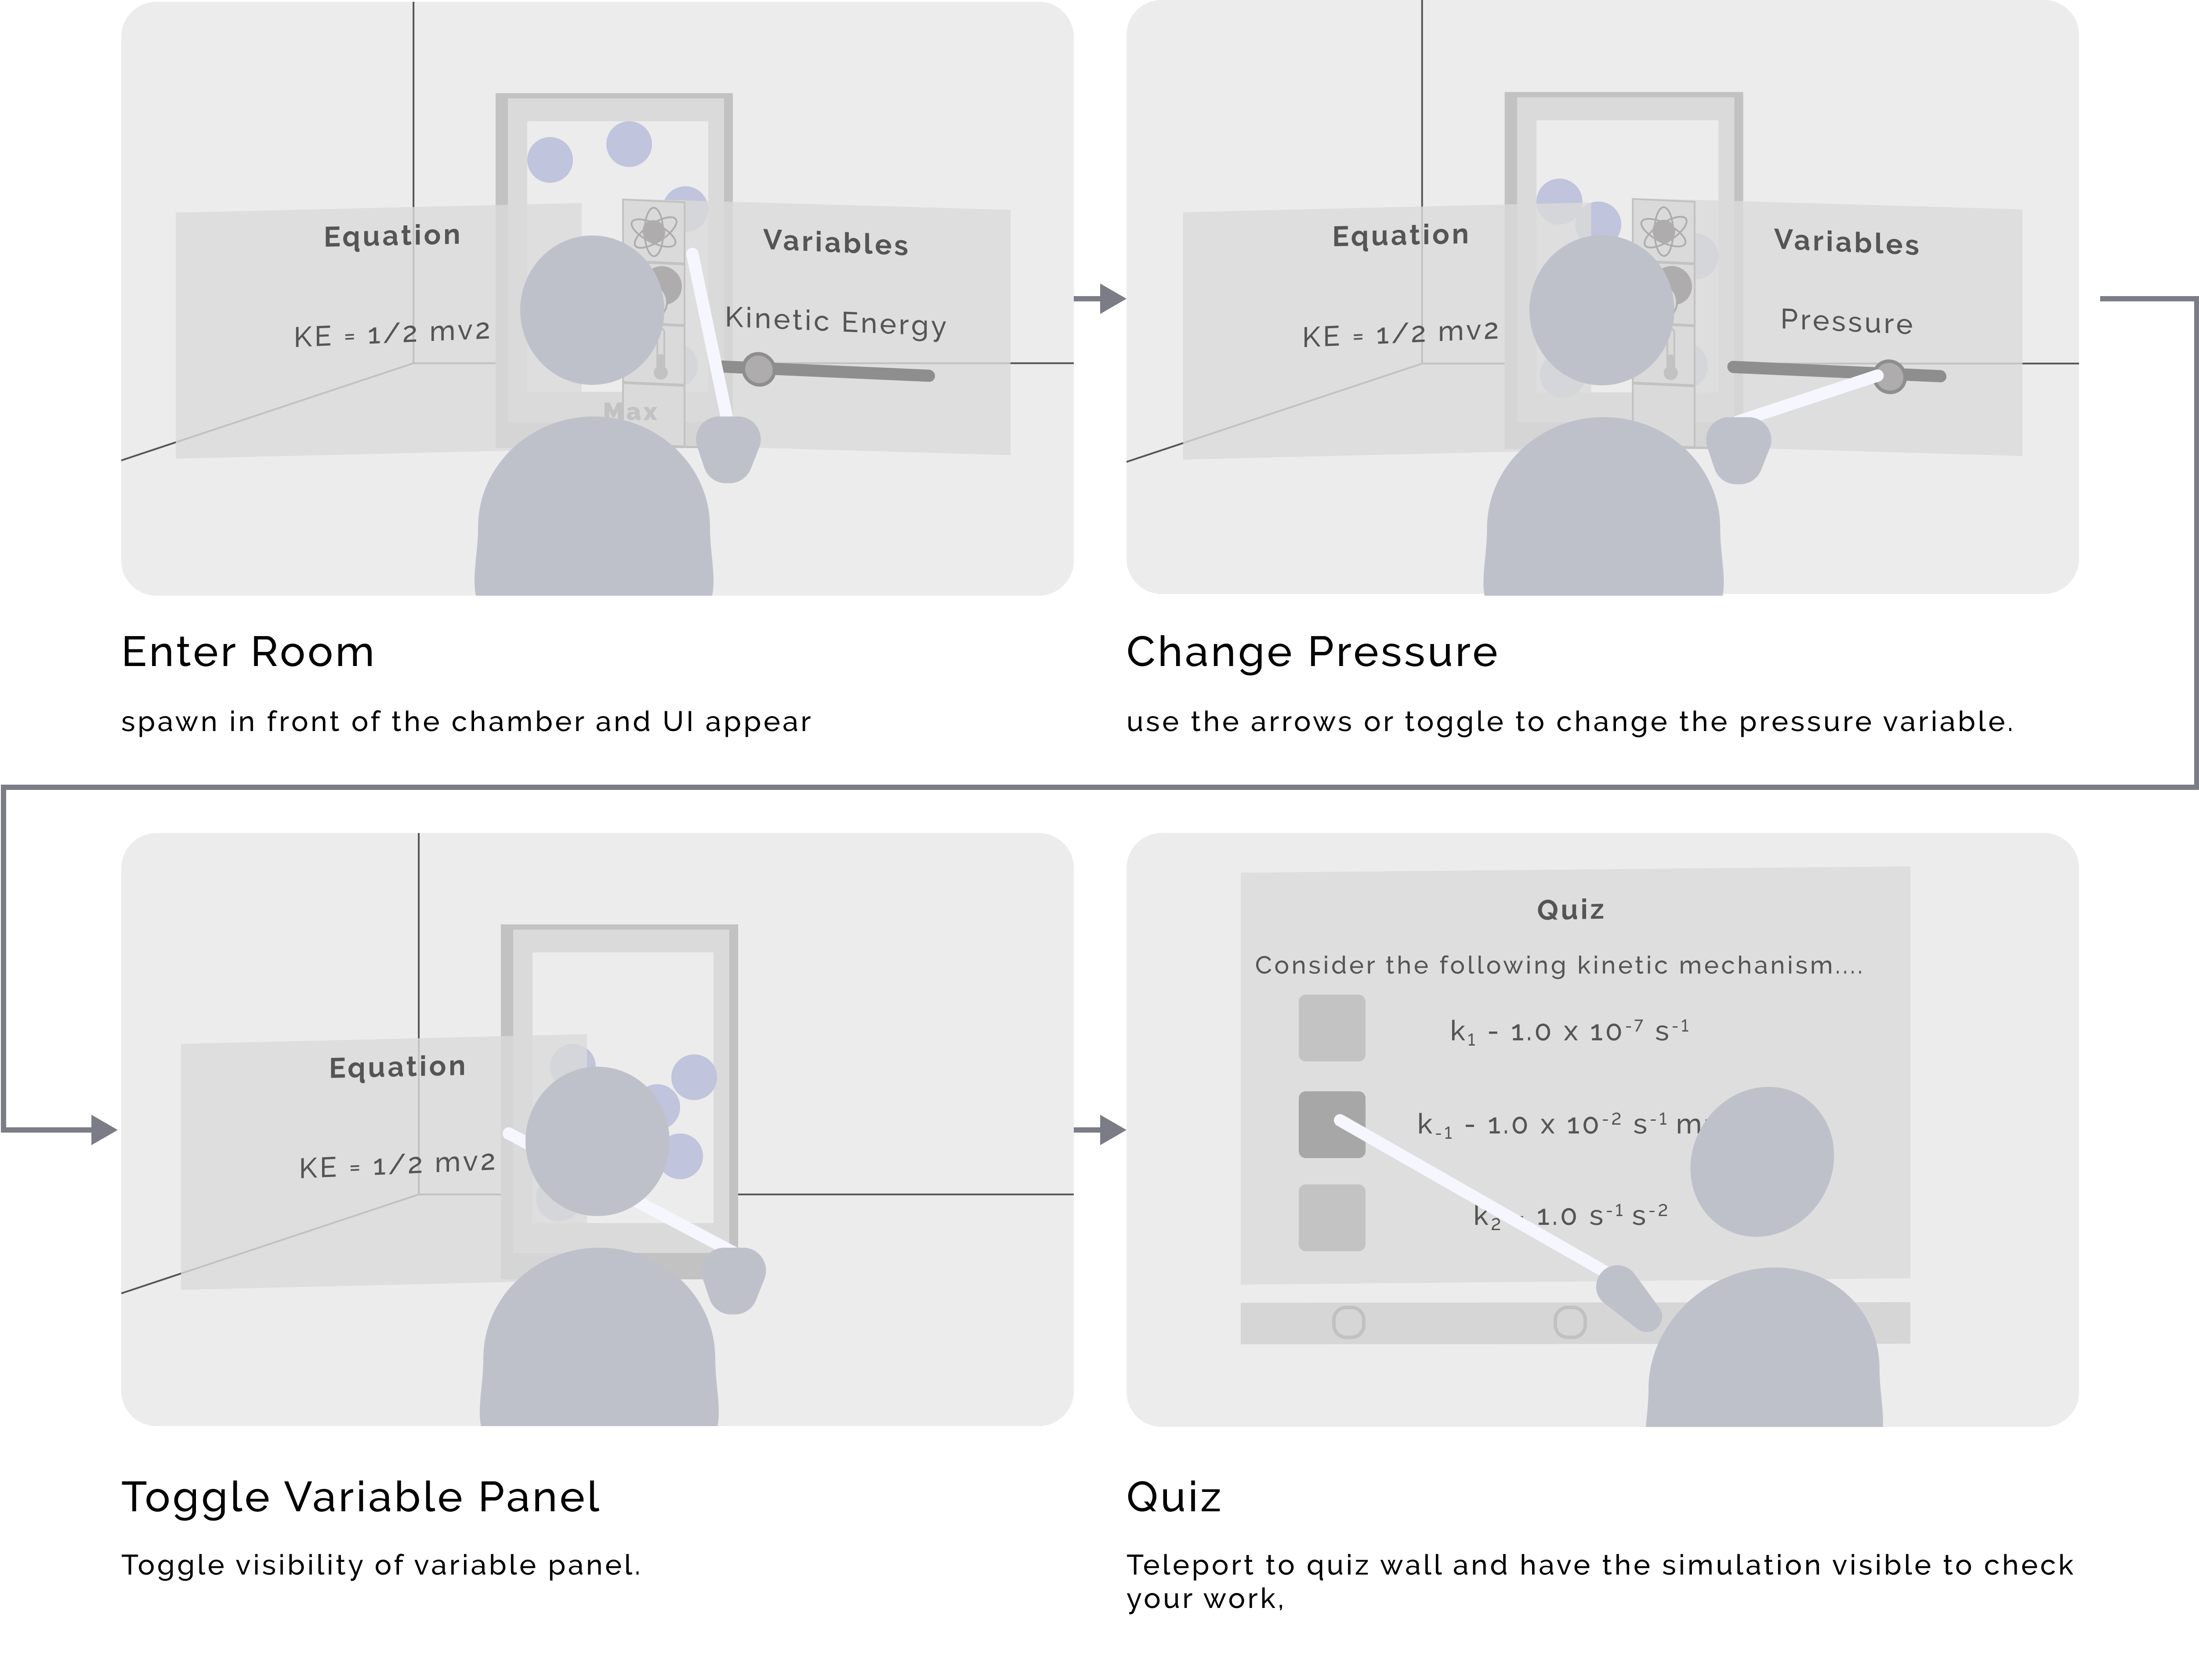 userflow storyboard, enter room spawn in front of the chamber and ui appears, change pressure, use the arrows or toggle to change the pressure variable, toggle variable panel, toggle visibility of variable panel, quiz, teleport to quiz wall and have the simulation visible to check your work